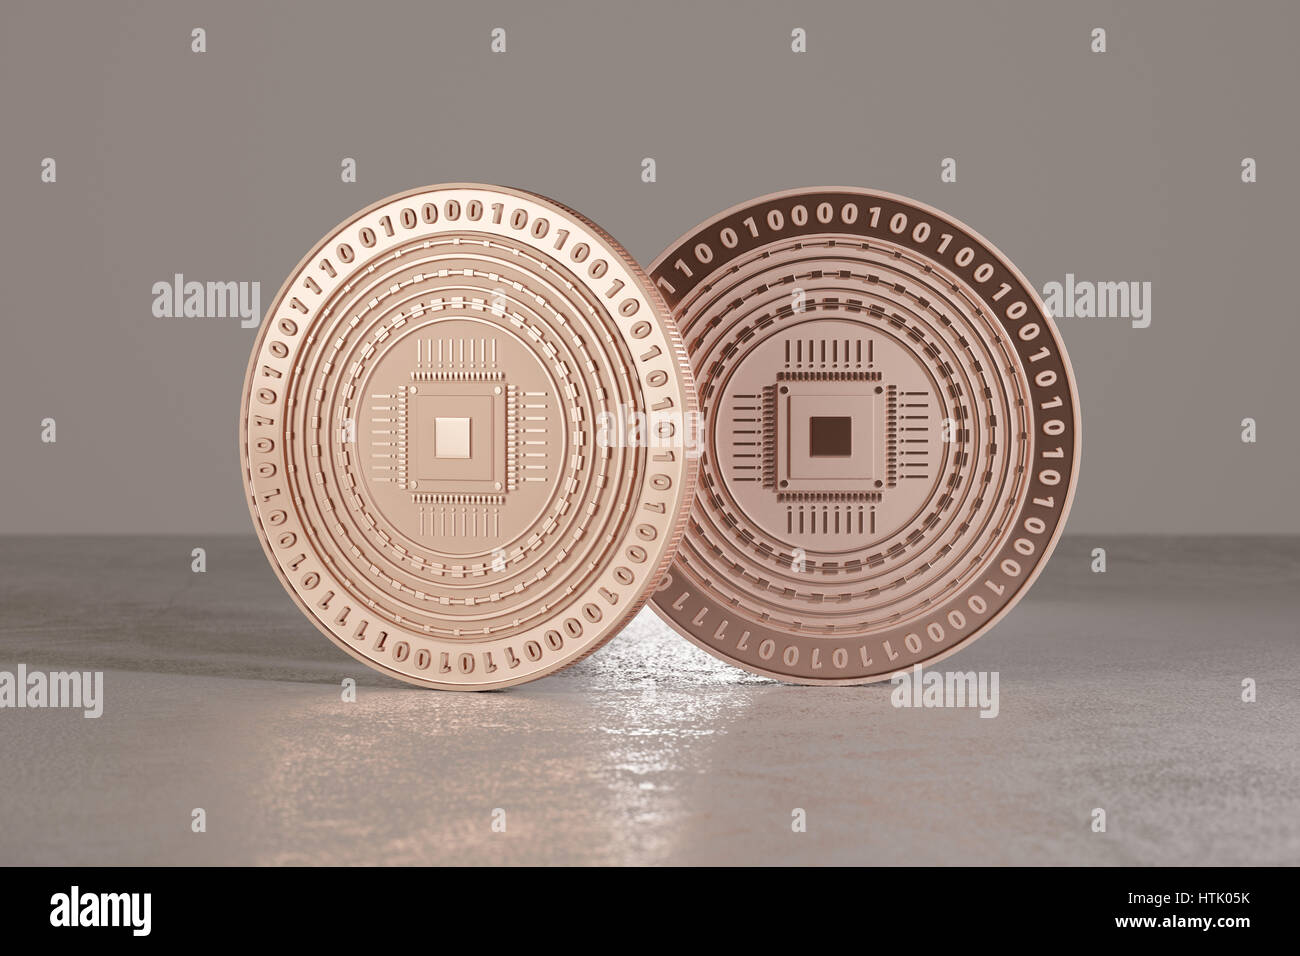 Copper digital coins on metal floor as example for bitcoins, fin-tech or online-banking Stock Photo